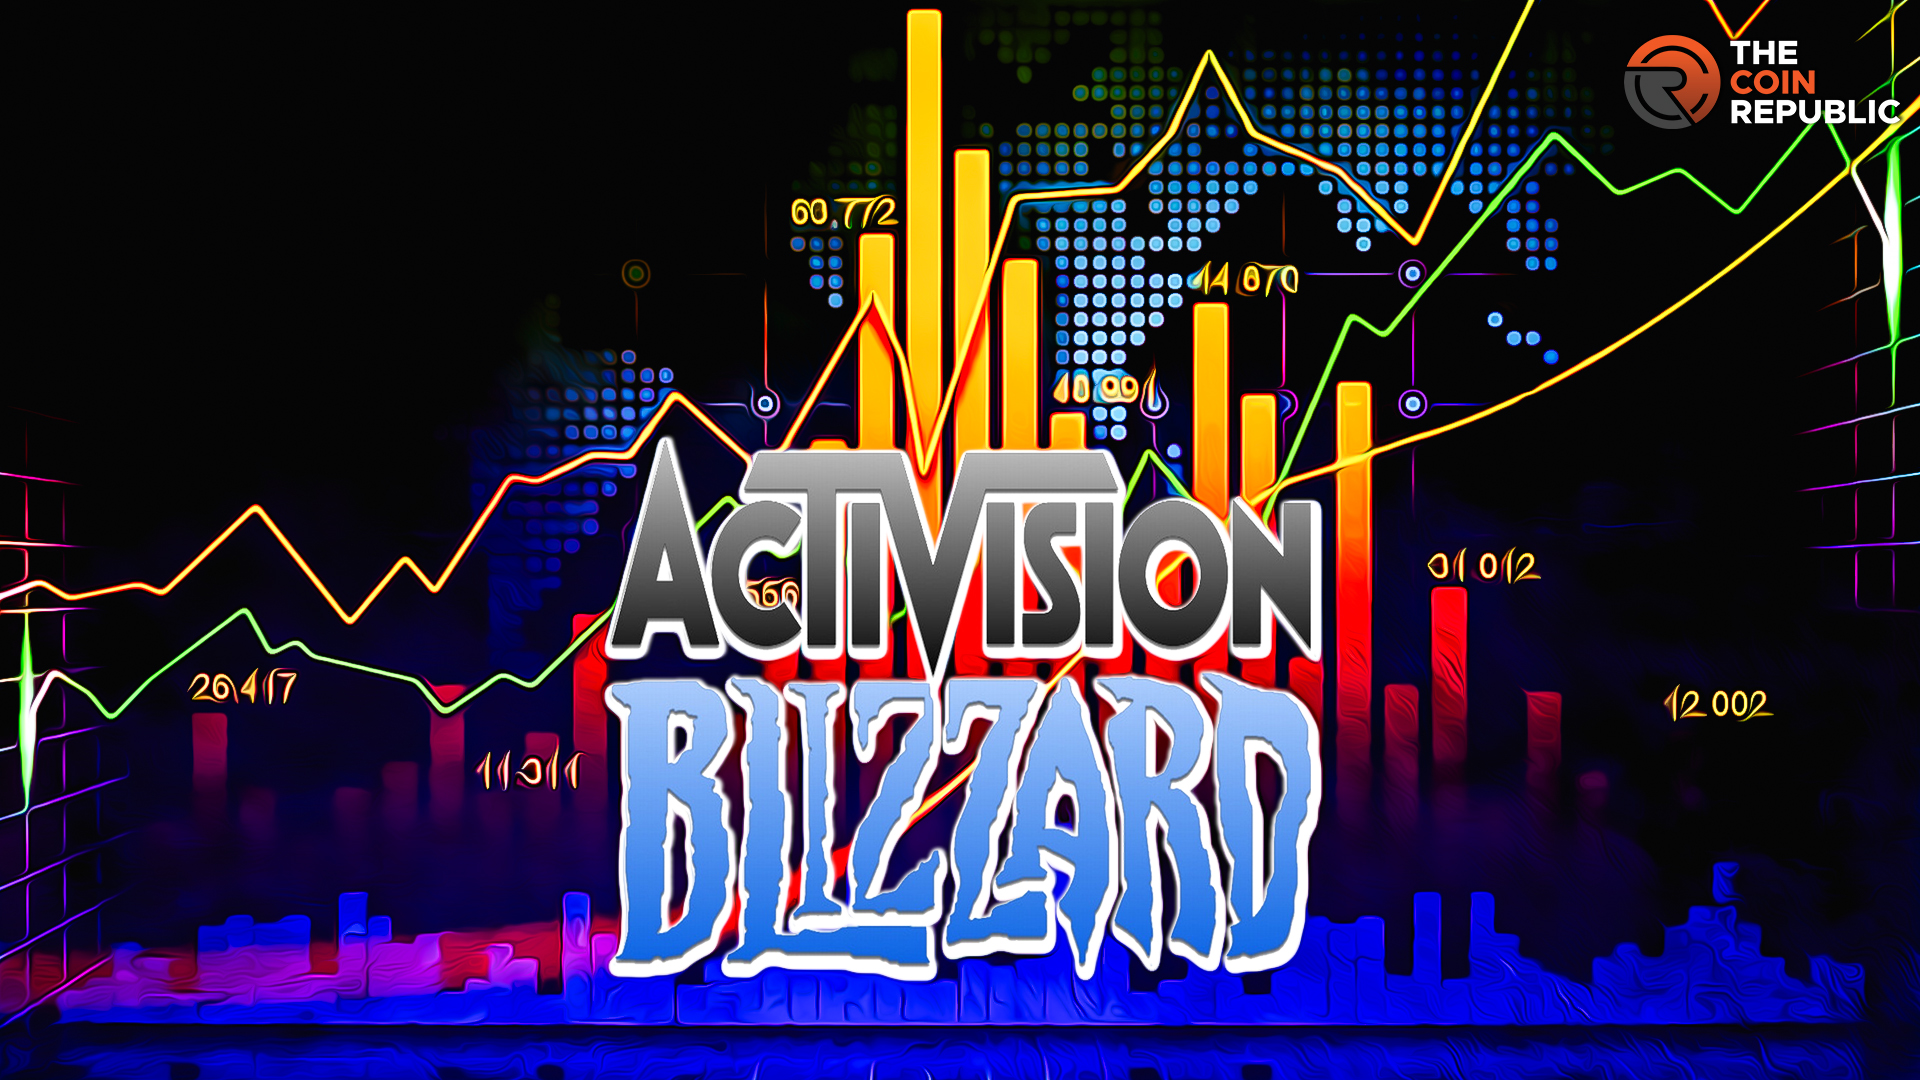 Activision Blizzard Sees Stock Jump Following World of Warcraft